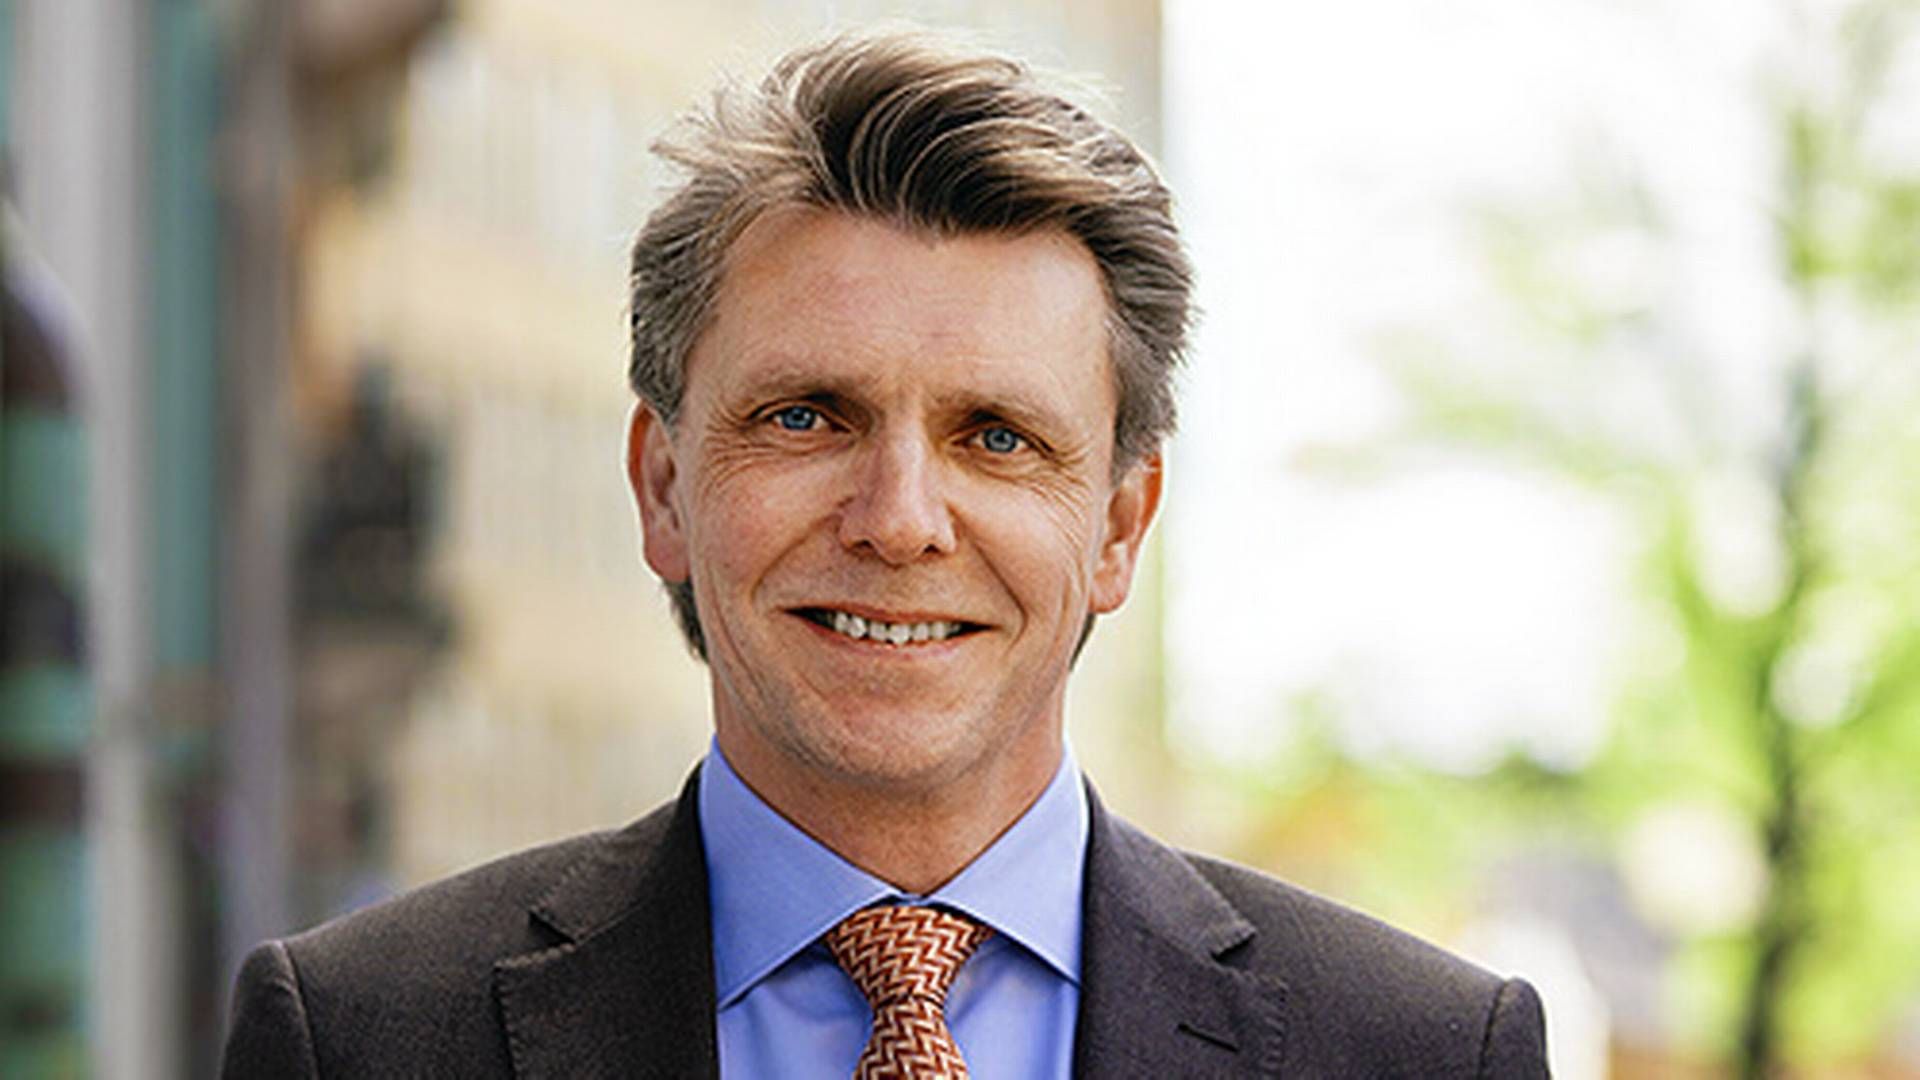 Axel Brändström joined Alecta as head of Real Assets in January 2020. | Photo: PR / Alecta